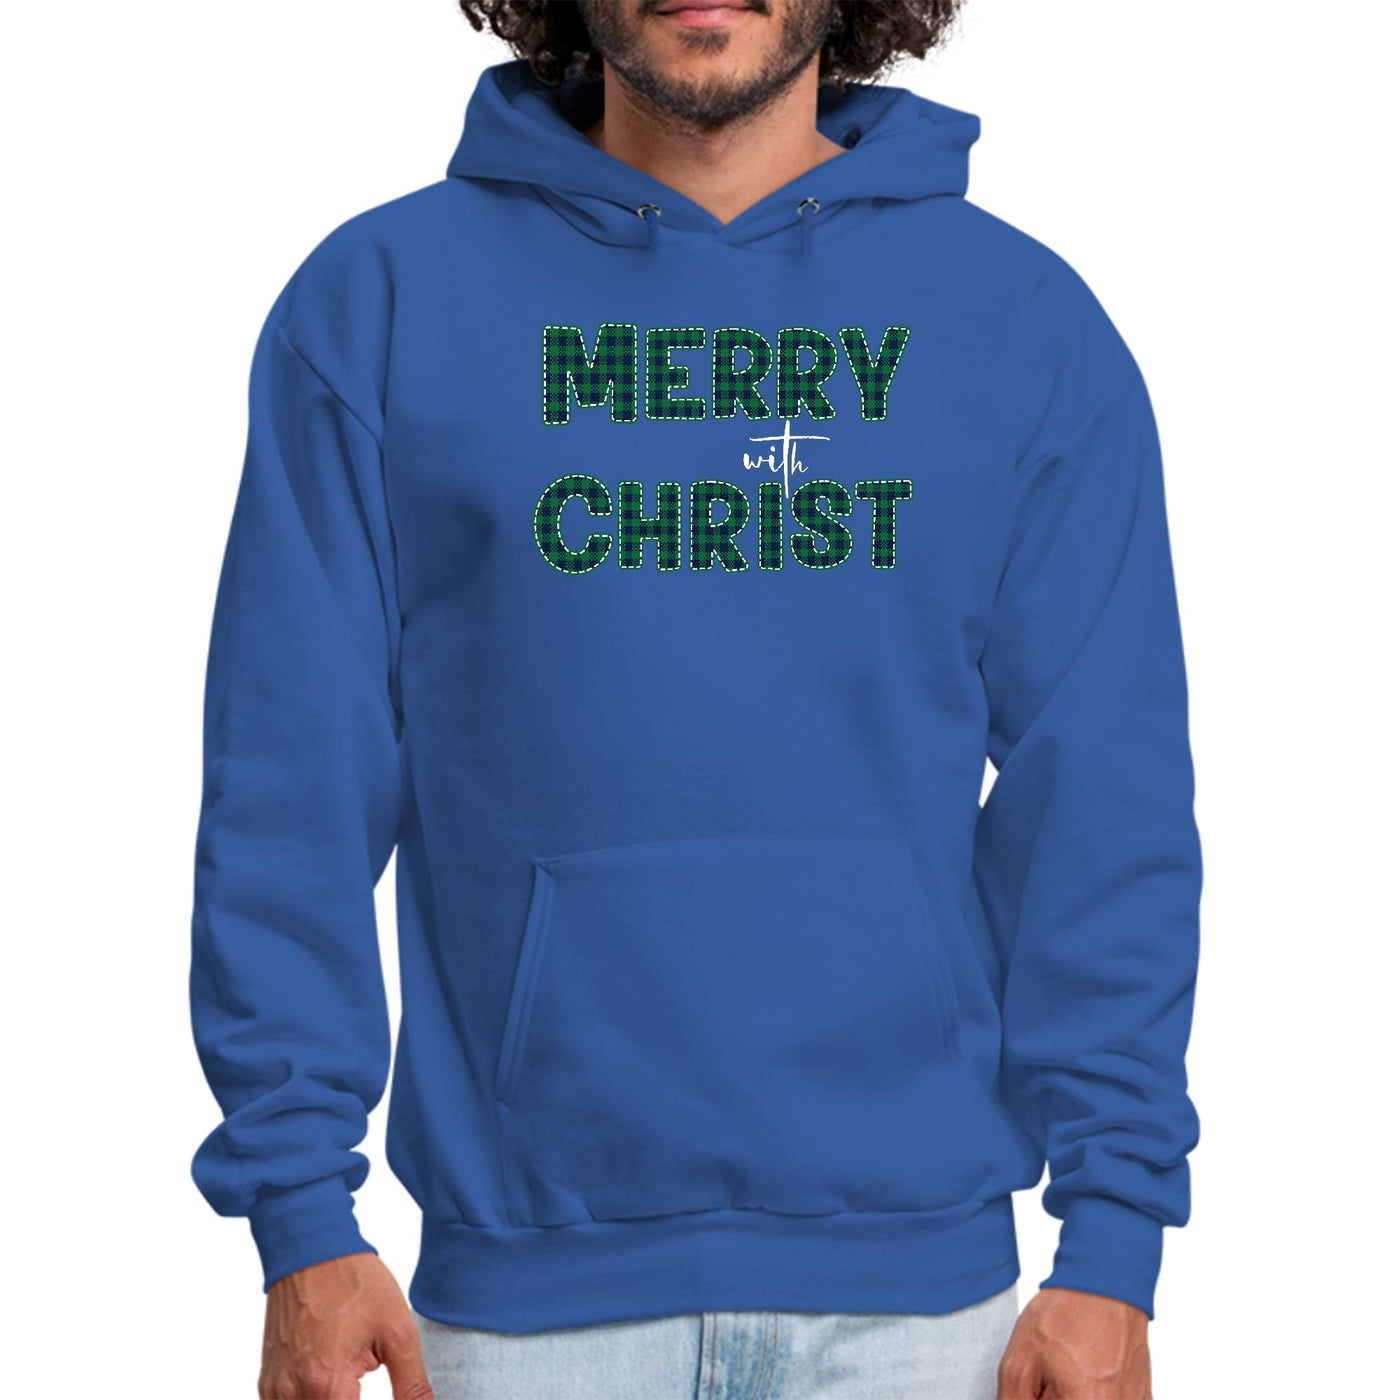 Mens Graphic Hoodie Merry With Christ Green Plaid Christmas Holiday - Unisex